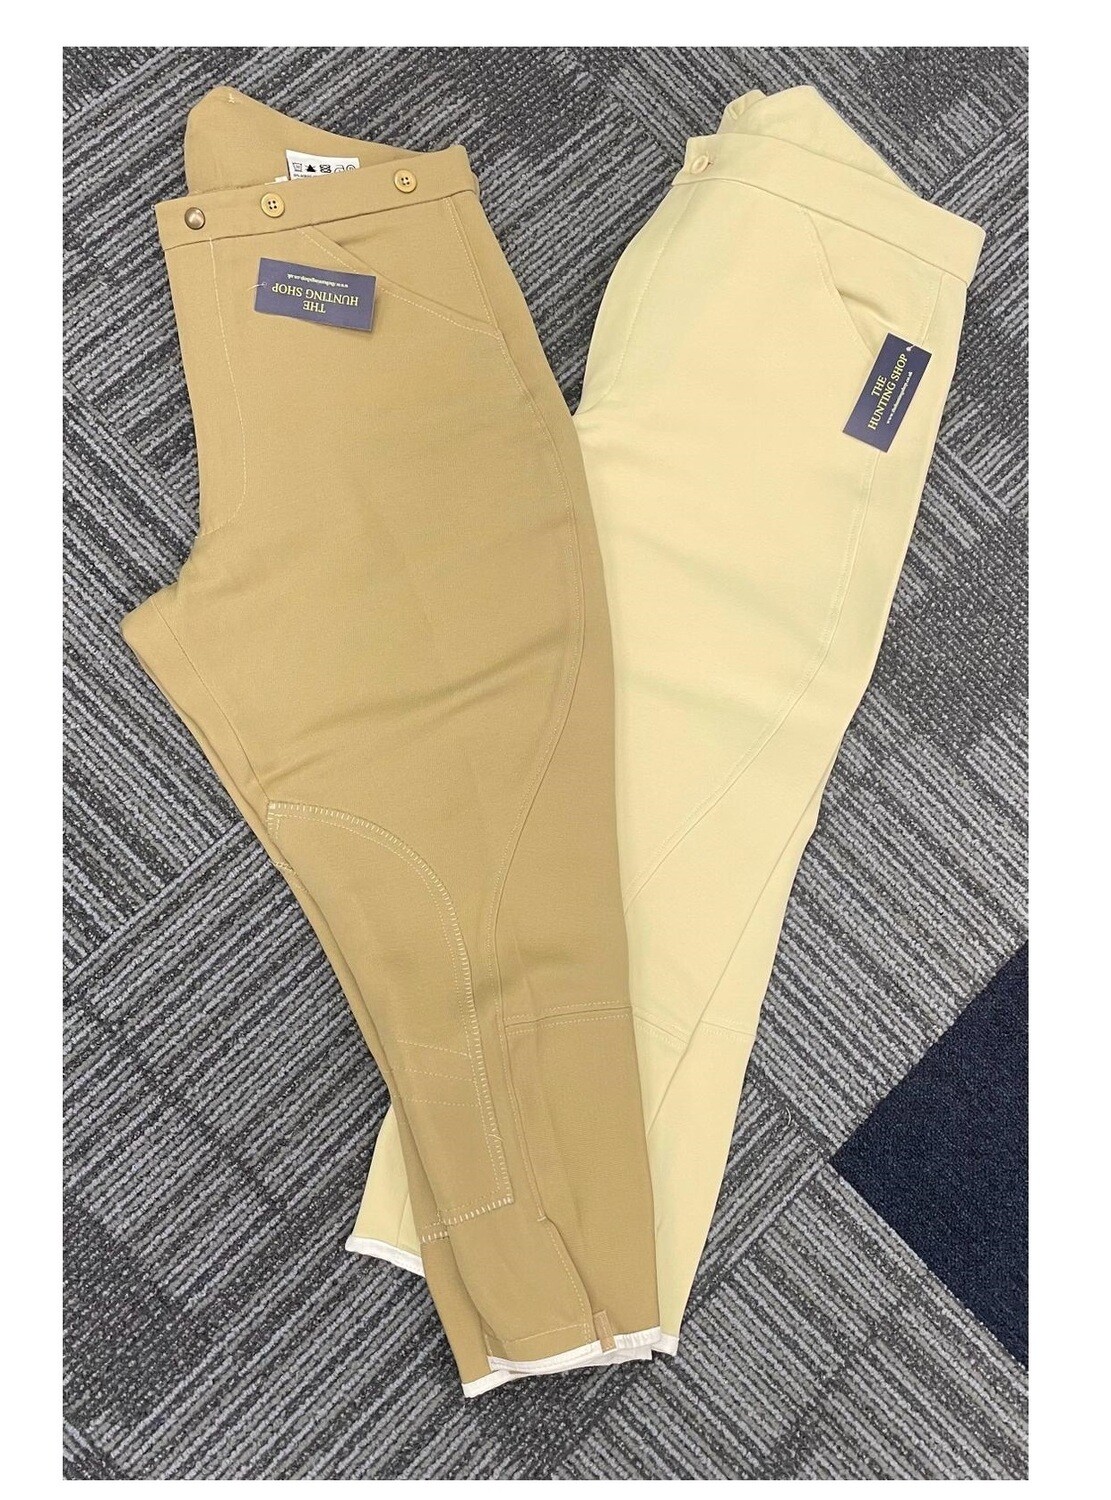 Gents 38" Fawn, Peaked Back, One Way Stretch Breeches - End of Season Sale